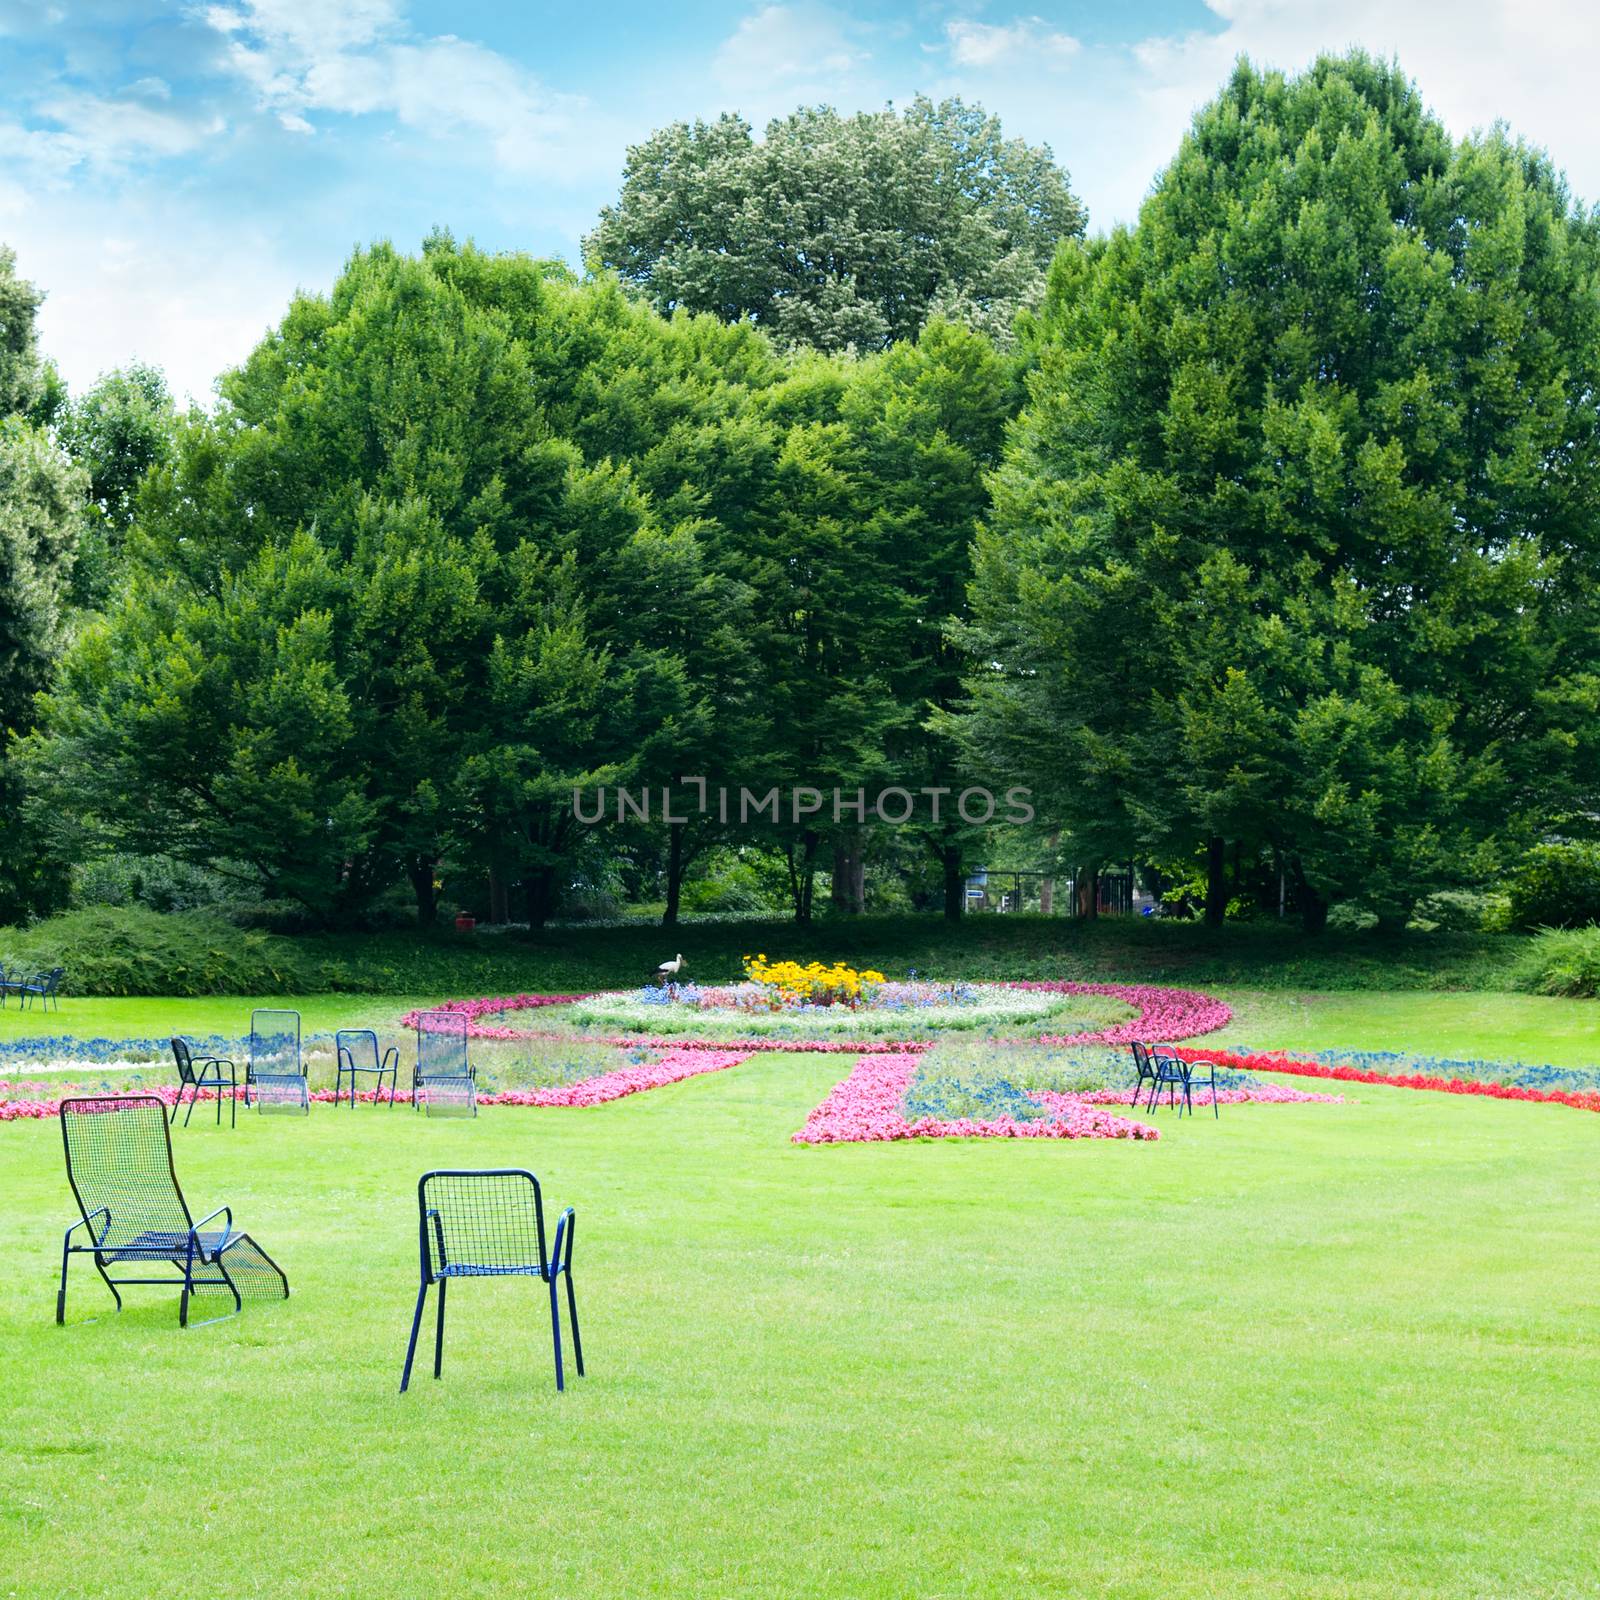 Lounge chairs for relaxing in the summer park